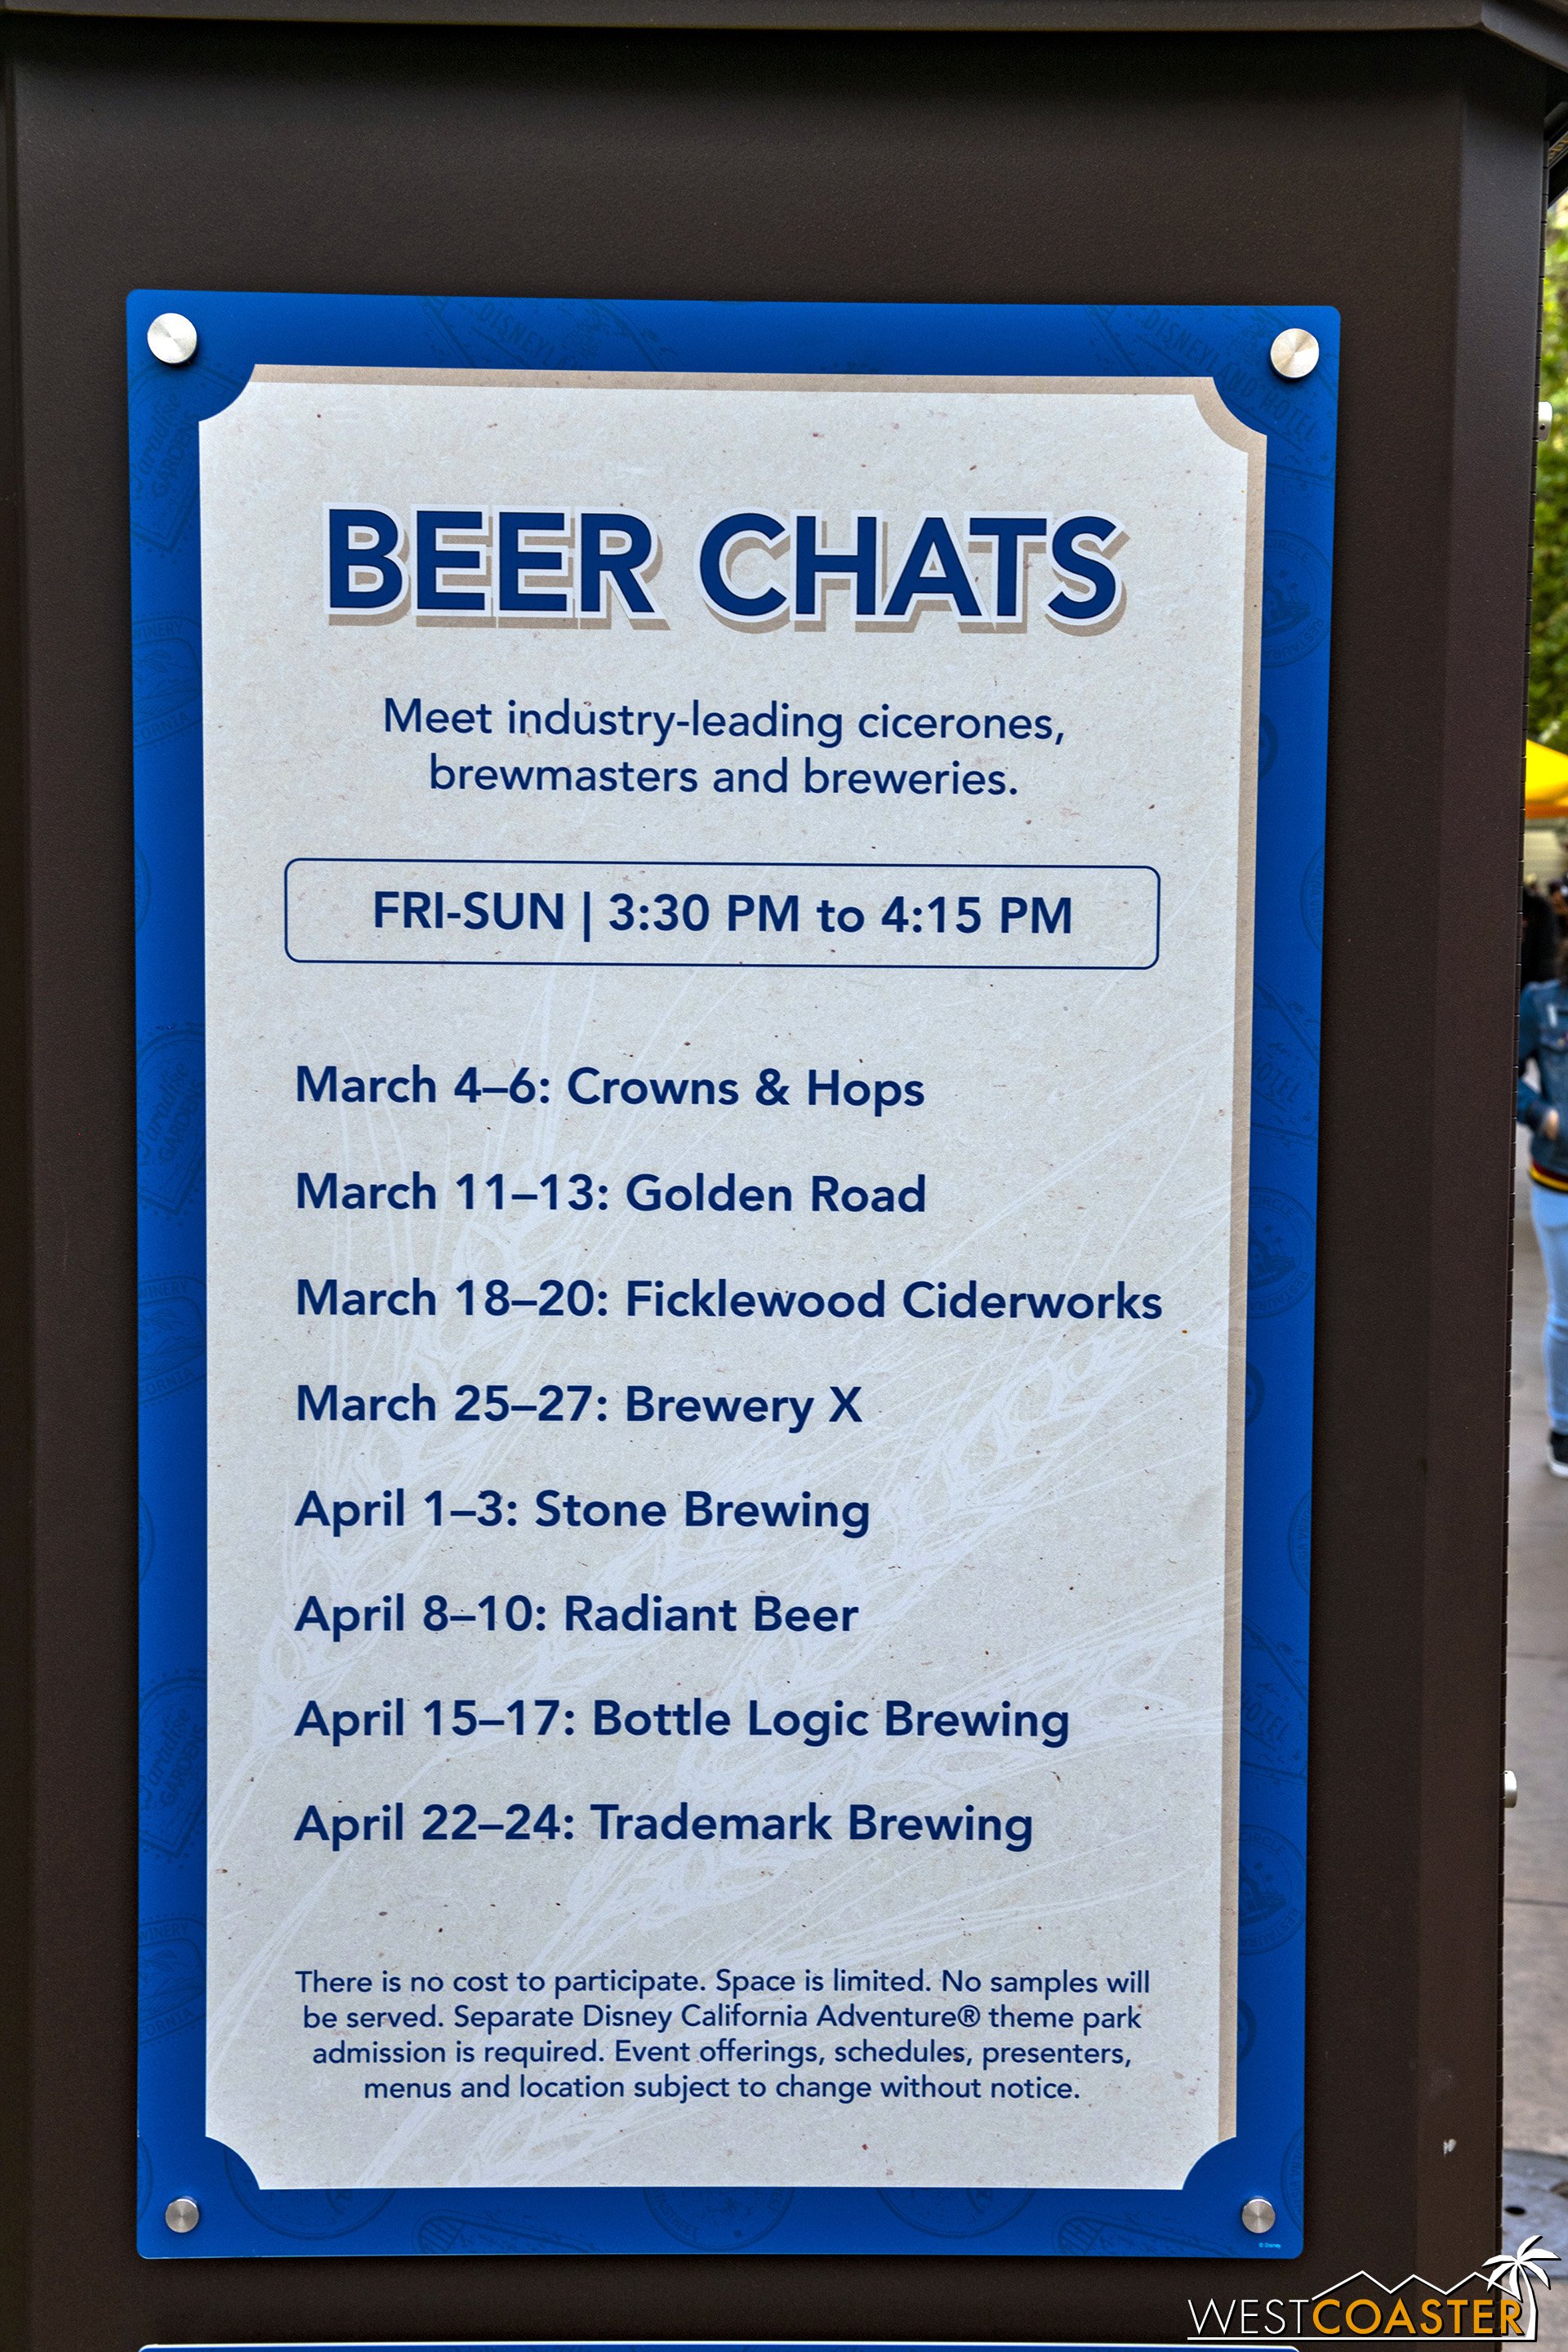  Beer Chats are offered Fridays through Sundays.  They’re free, but guests need to register.   